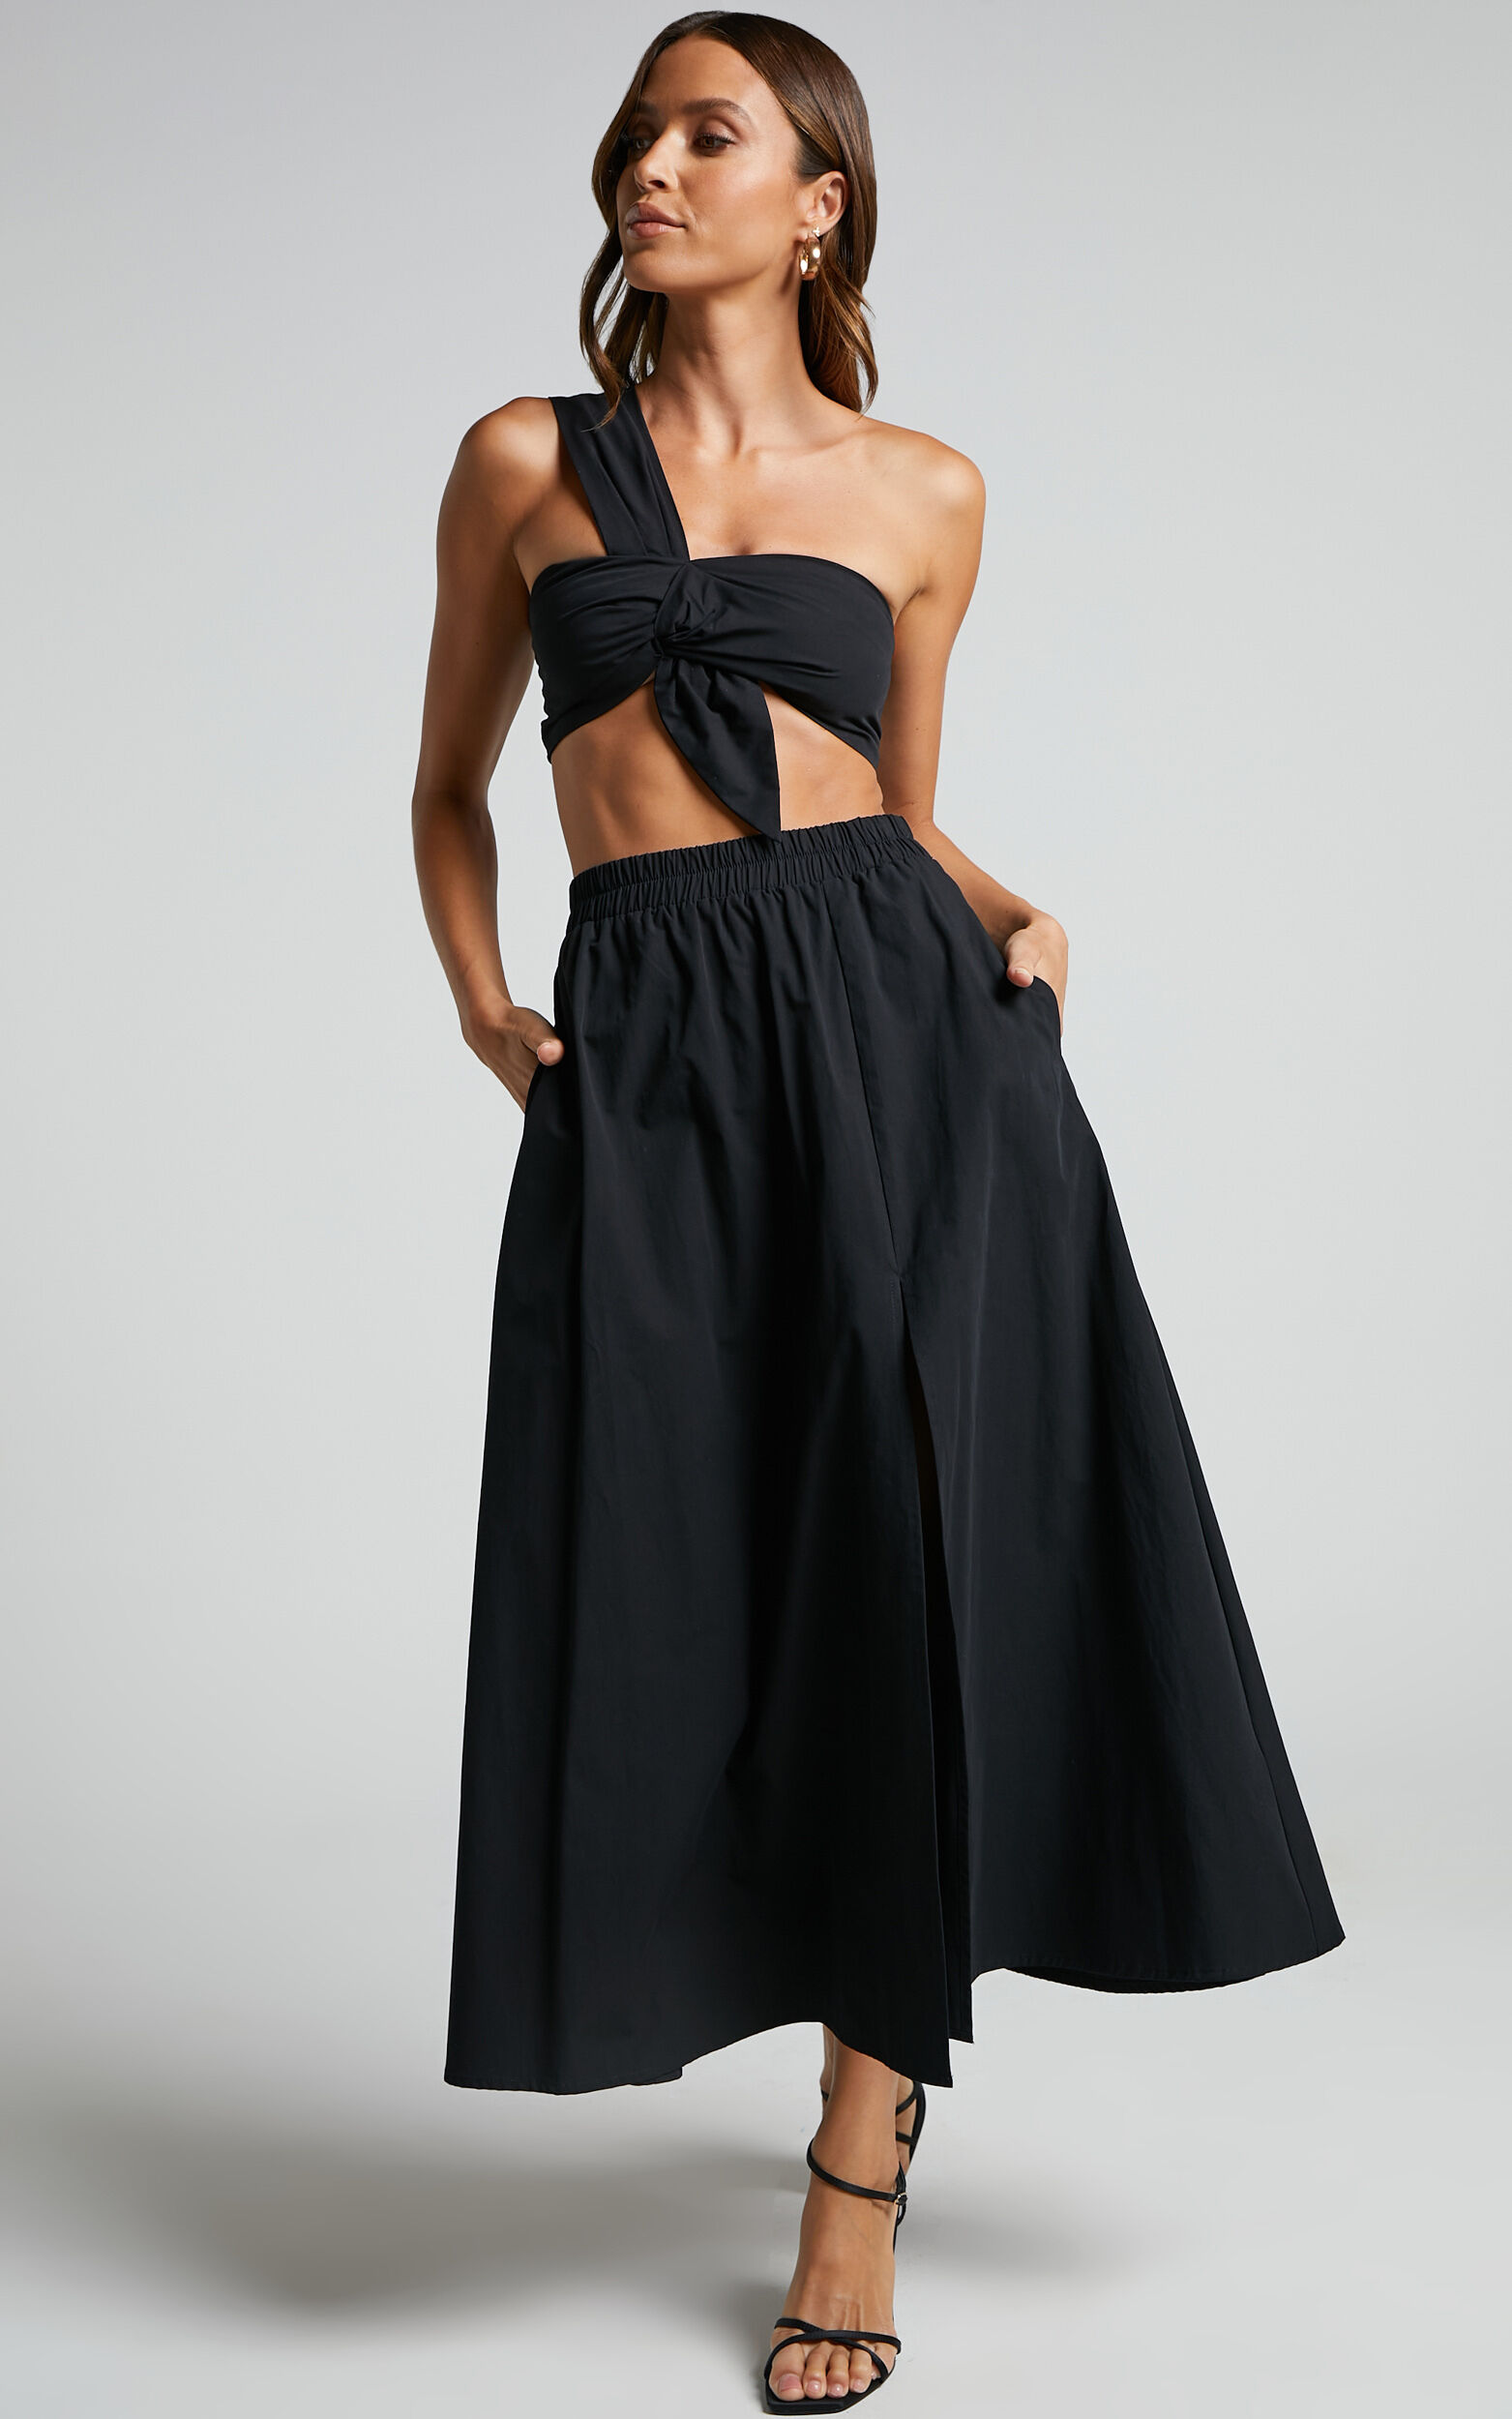 Black Script Print One Shoulder Ruched Midi Skirt Two Piece Set - Hot Miami  Styles